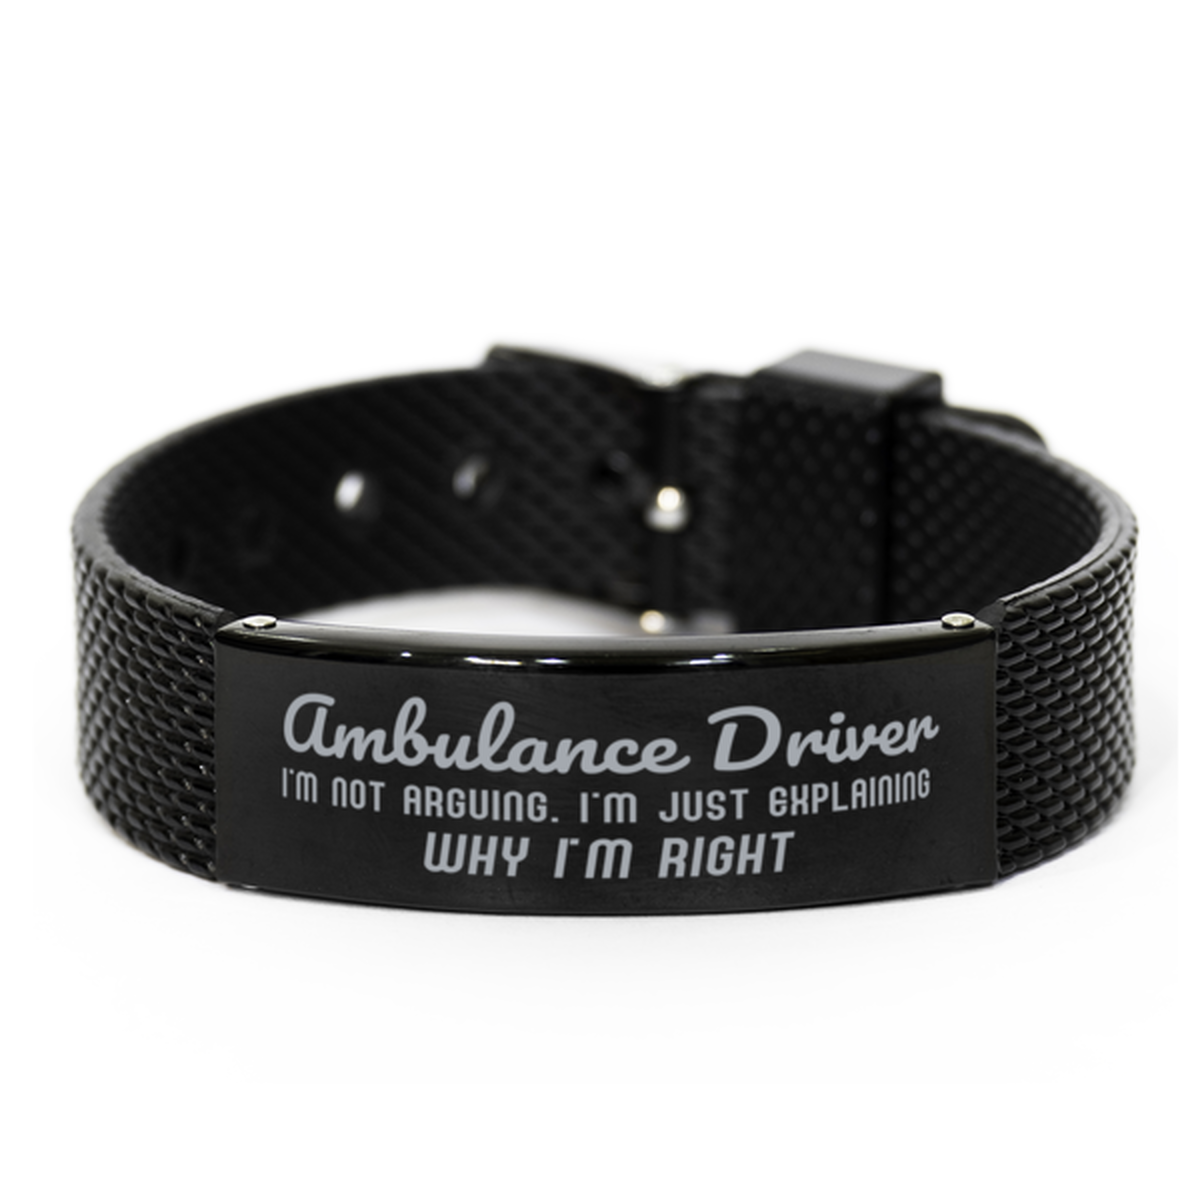 Ambulance Driver I'm not Arguing. I'm Just Explaining Why I'm RIGHT Black Shark Mesh Bracelet, Funny Saying Quote Ambulance Driver Gifts For Ambulance Driver Graduation Birthday Christmas Gifts for Men Women Coworker